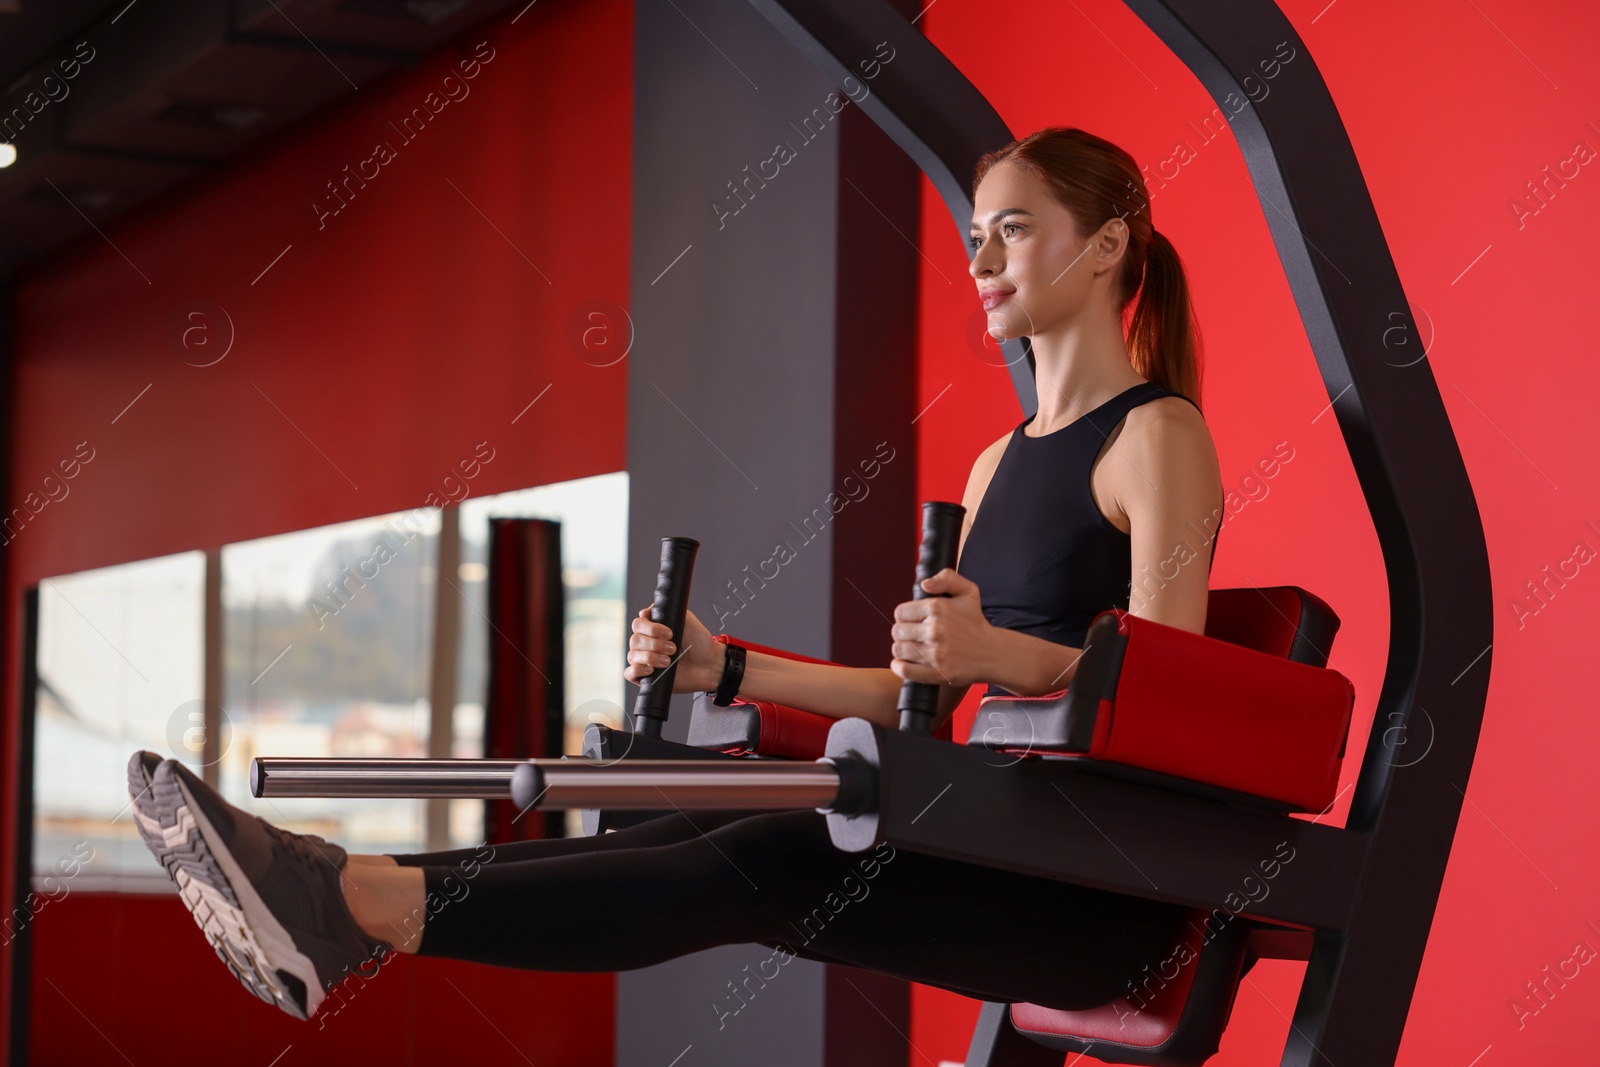 Photo of Athletic young woman training on power tower station in gym